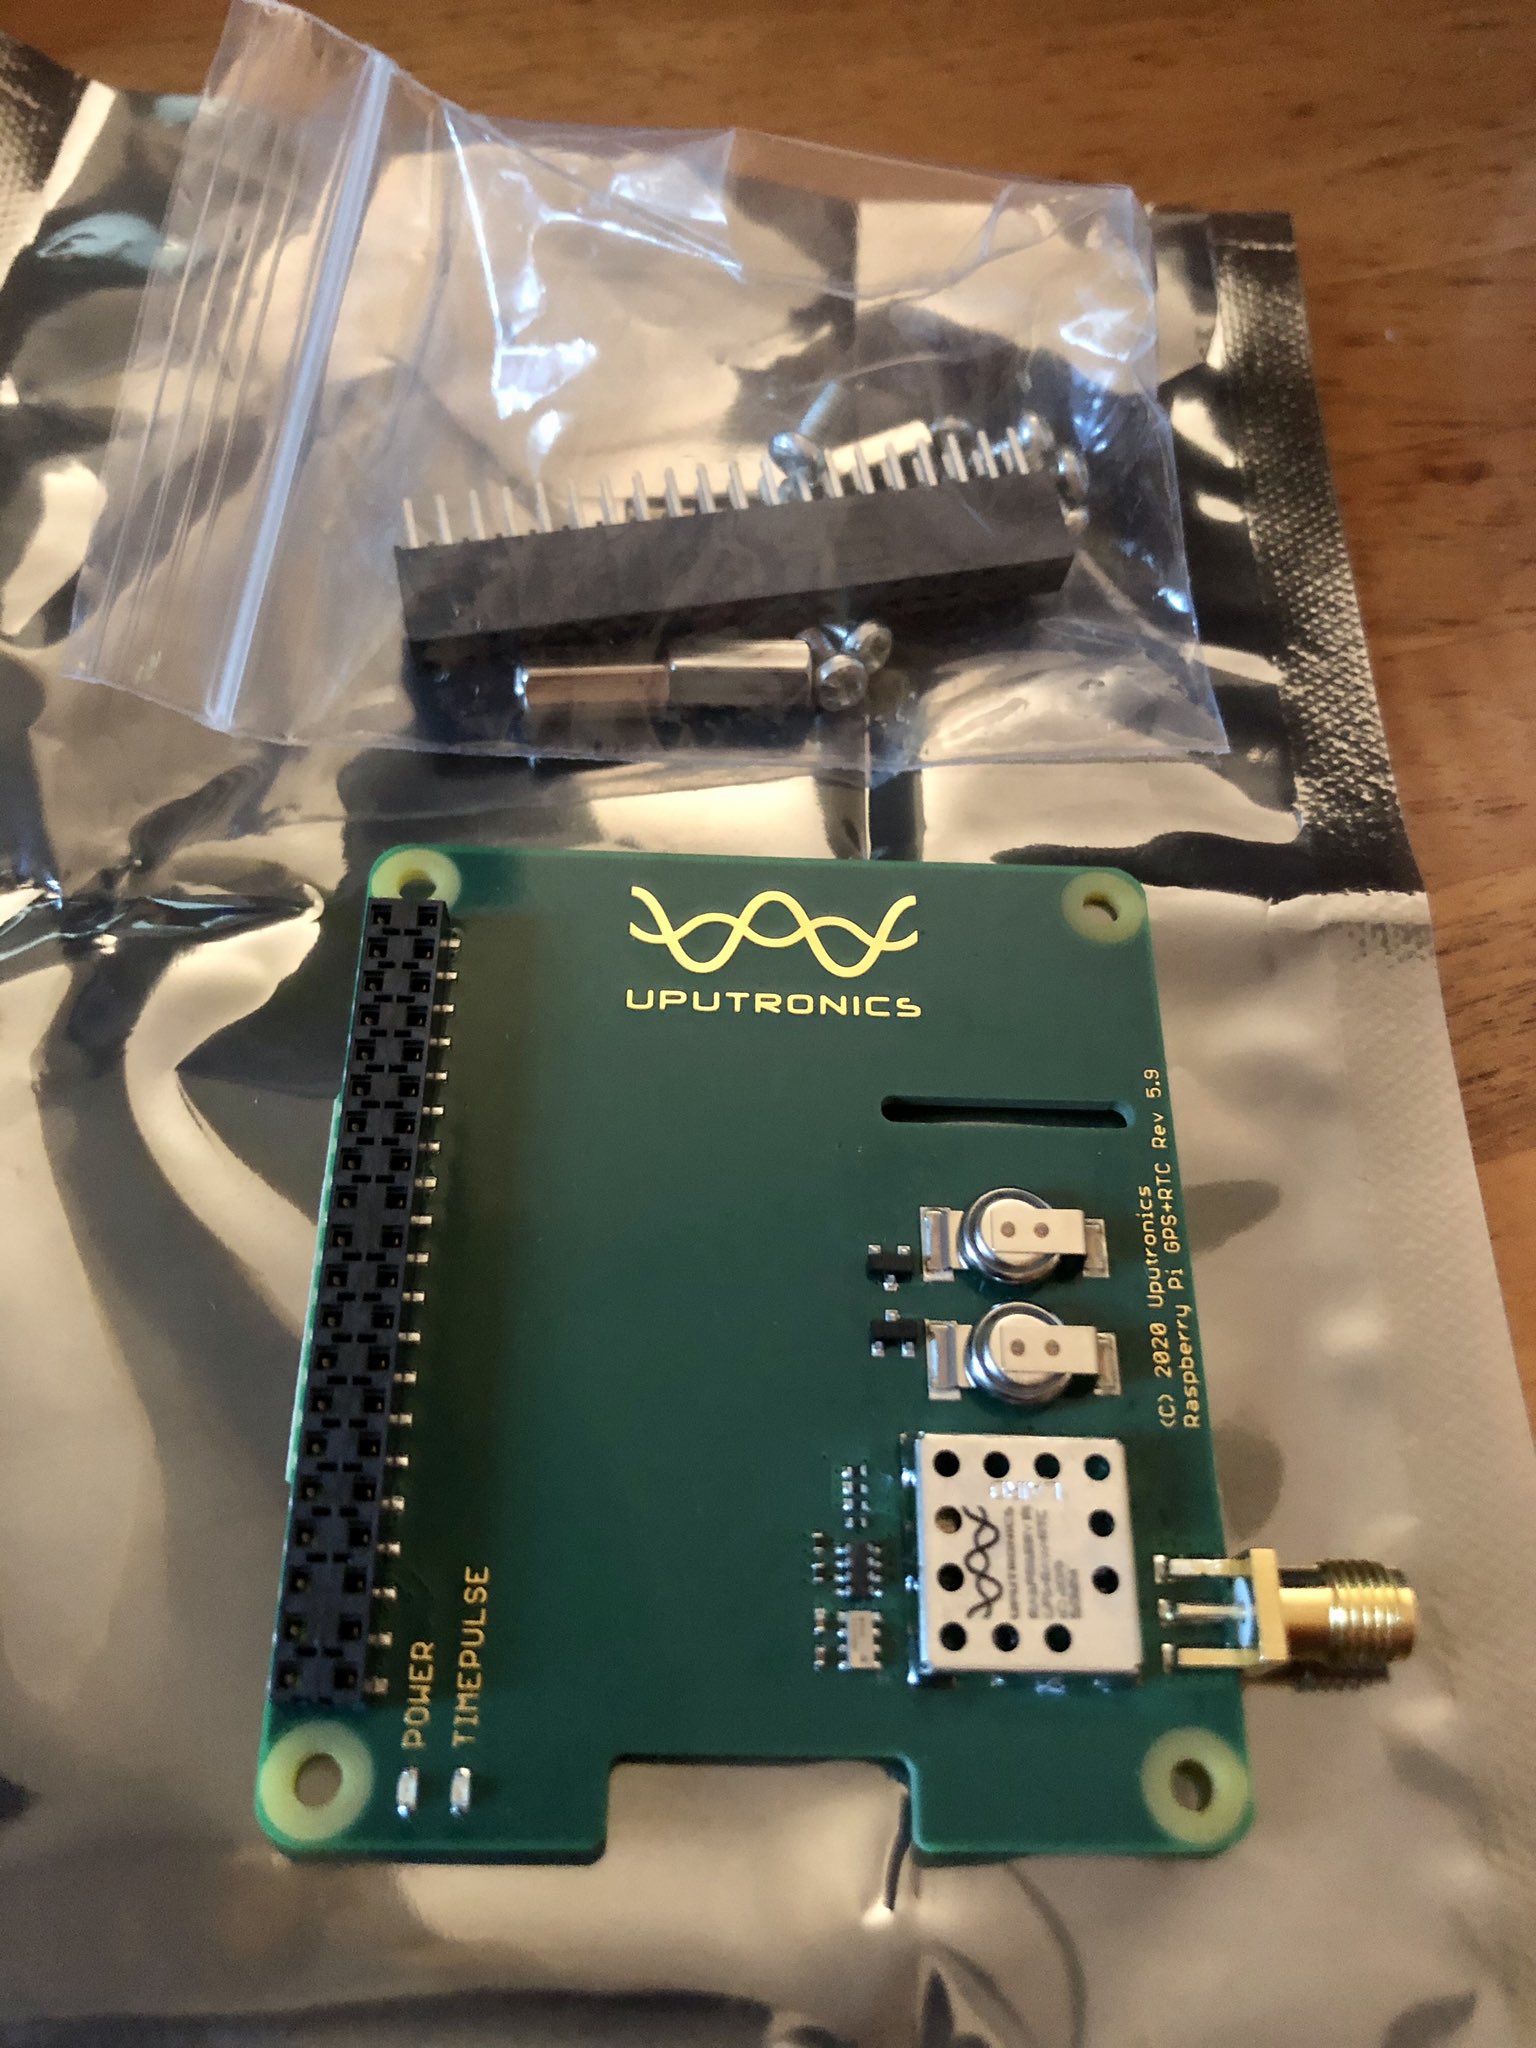 Satellite Receive Station with RTL-SDR and Raspberry Pi 